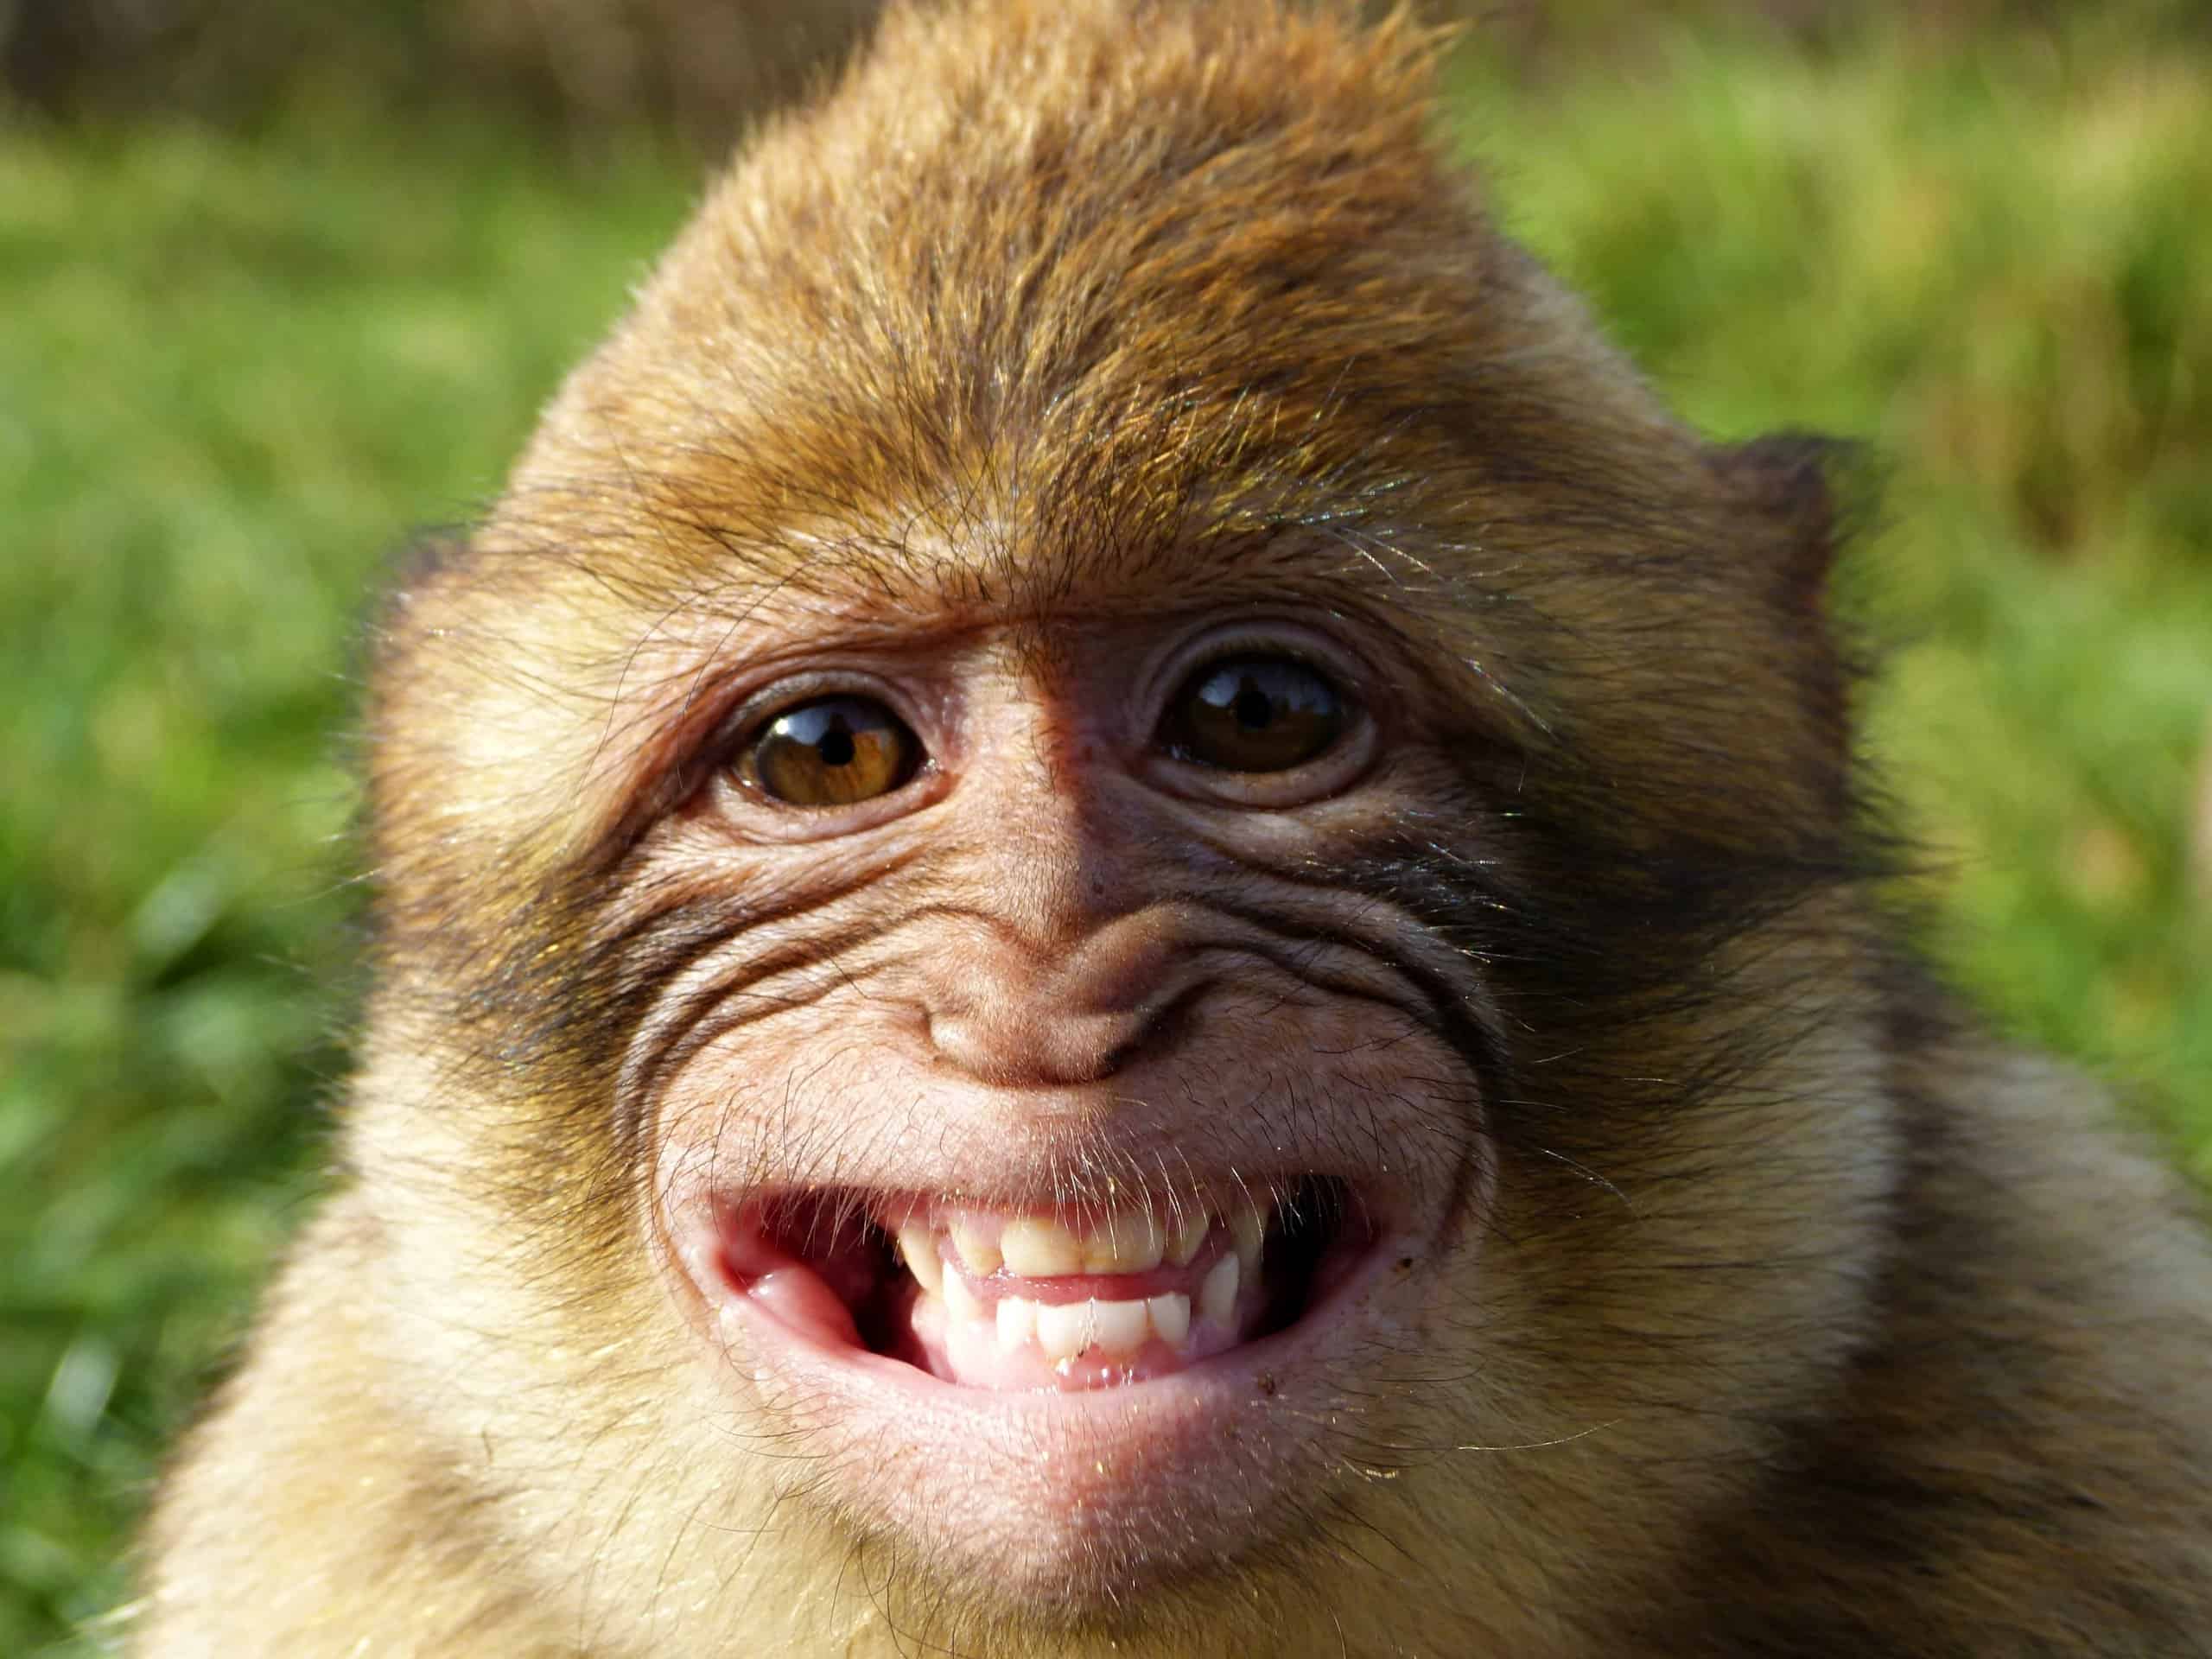 5 Incredible Videos of Monkeys Laughing (And Why They Do It) - AZ Animals